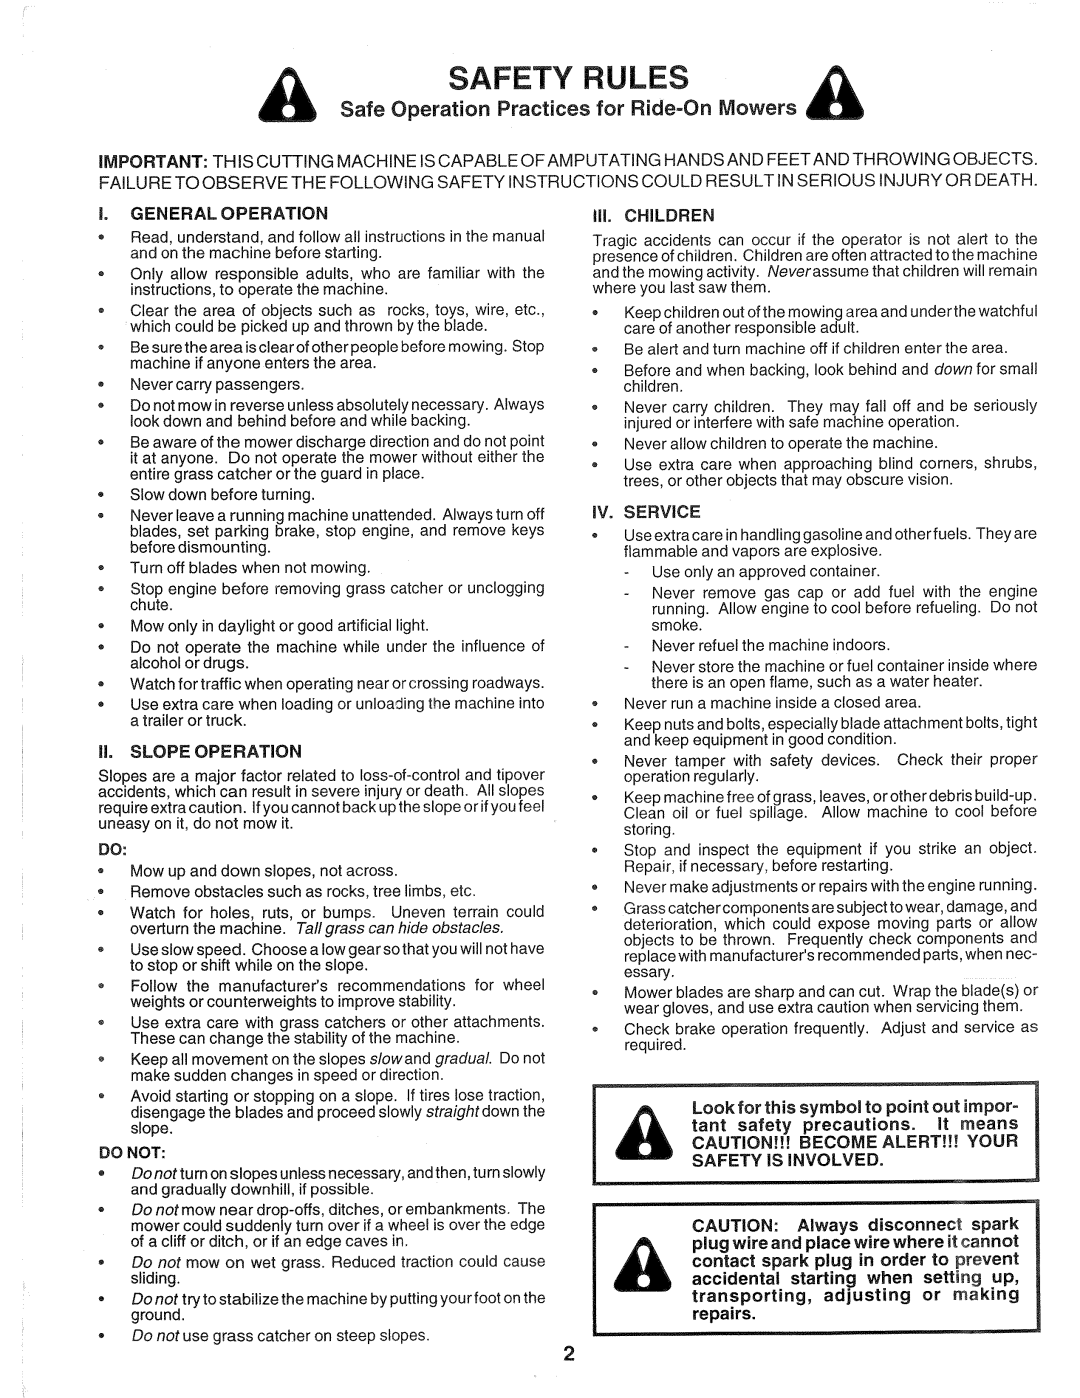 Sears 917.257720 Safety Rules, Safe Operation Practices for Ride-OnMowers, Il Slope Operation, Safety Is Involved 